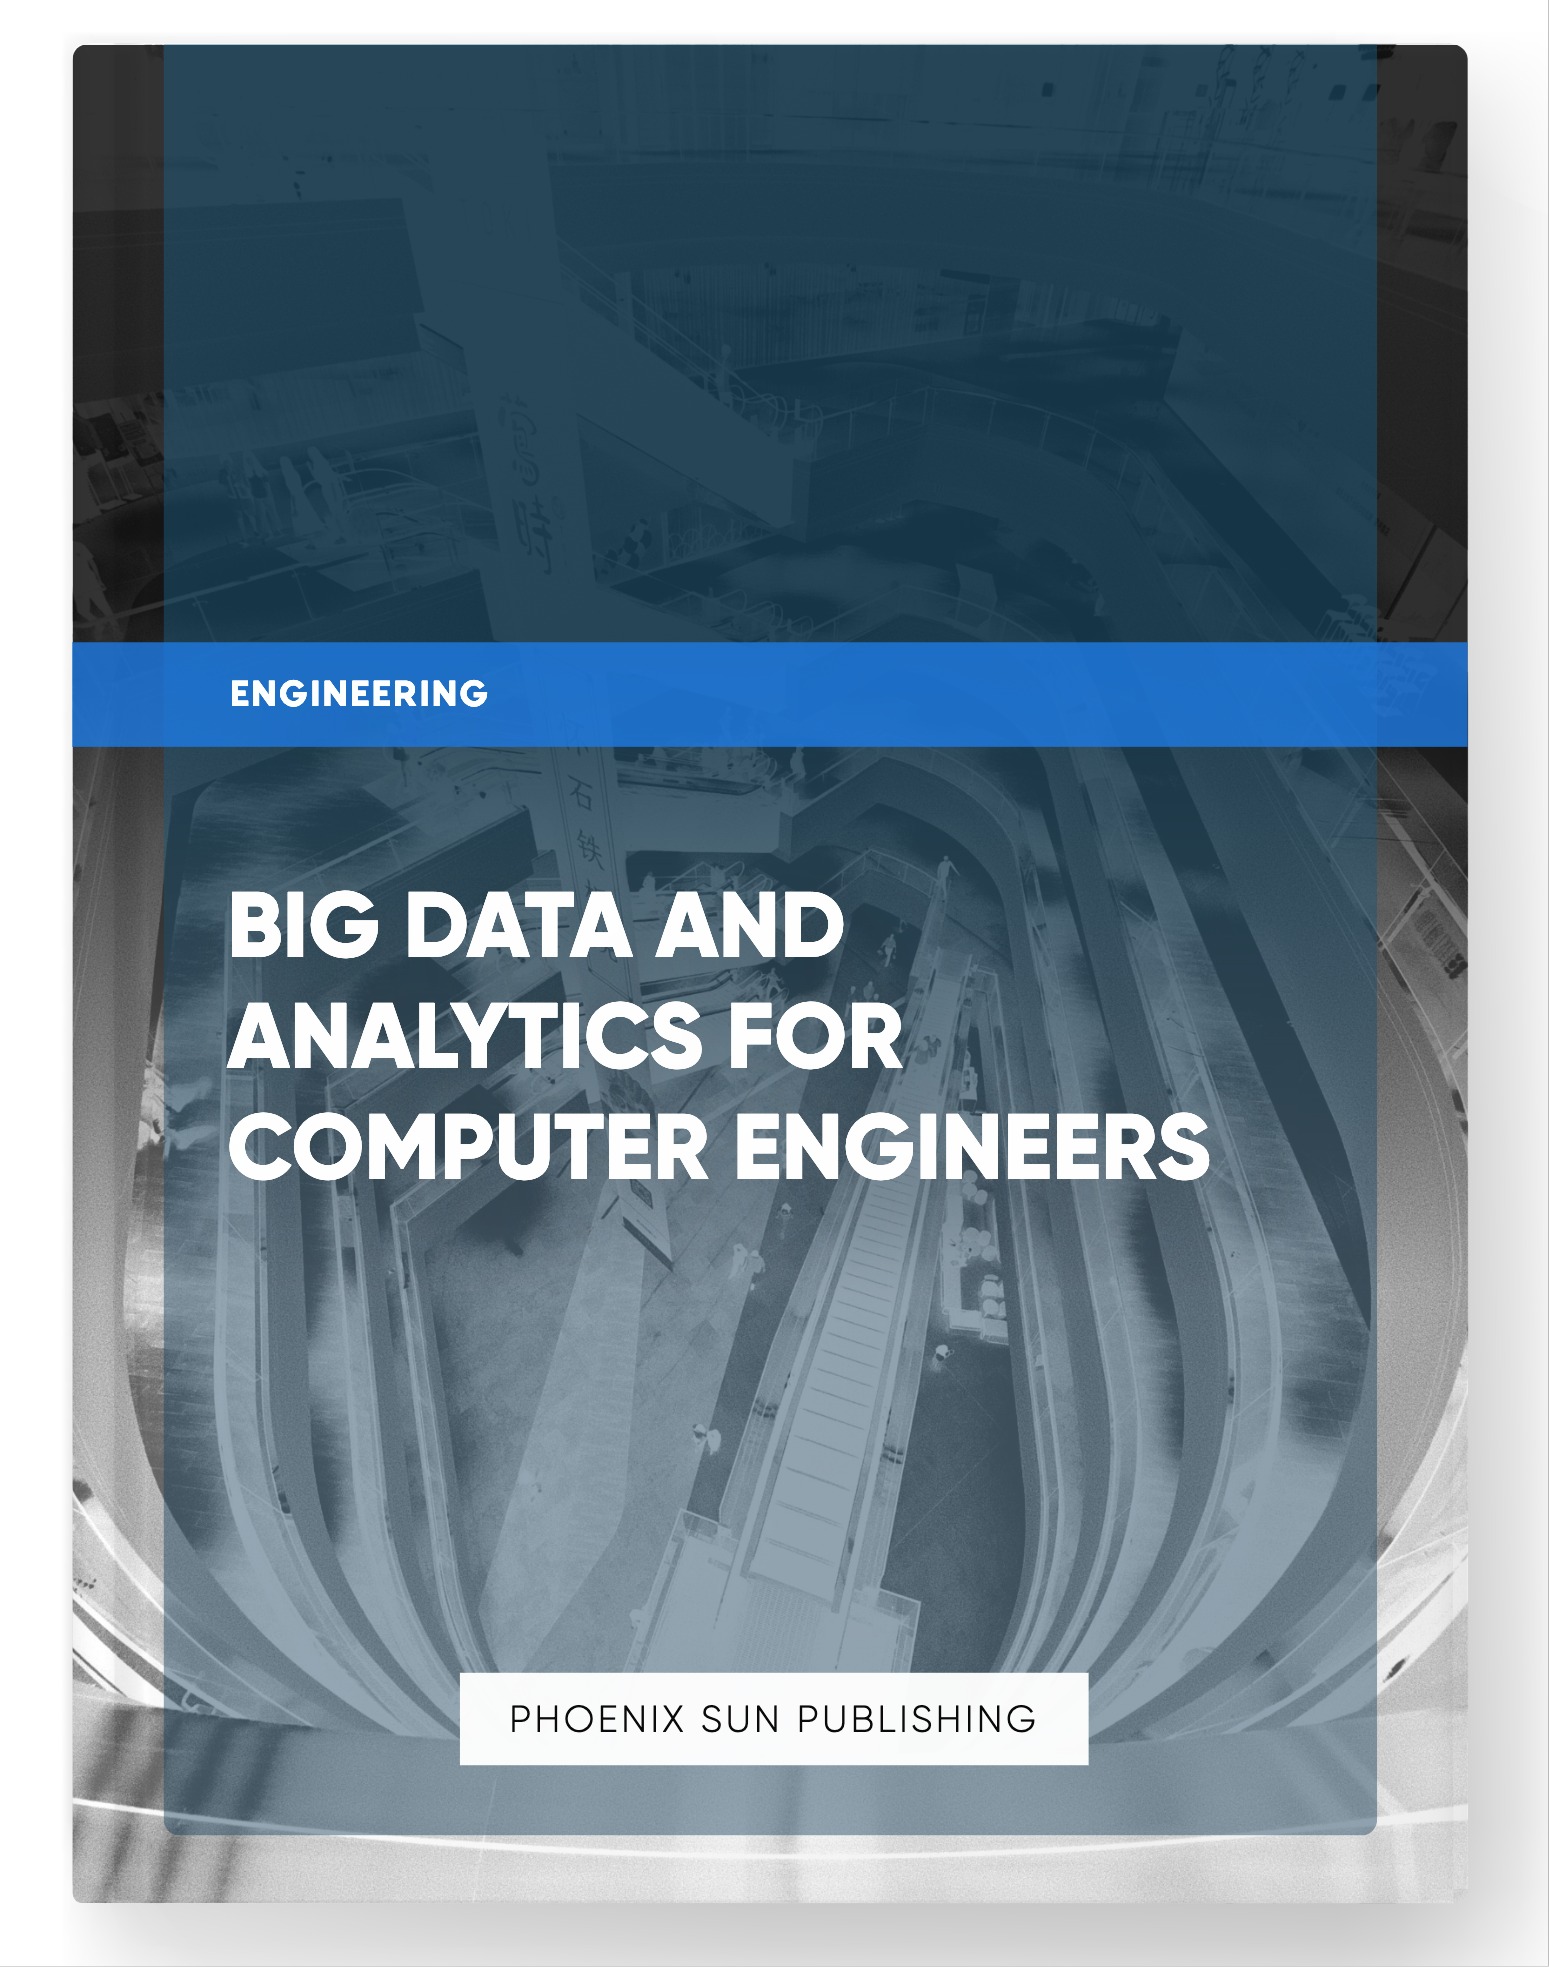 Big Data and Analytics for Computer Engineers